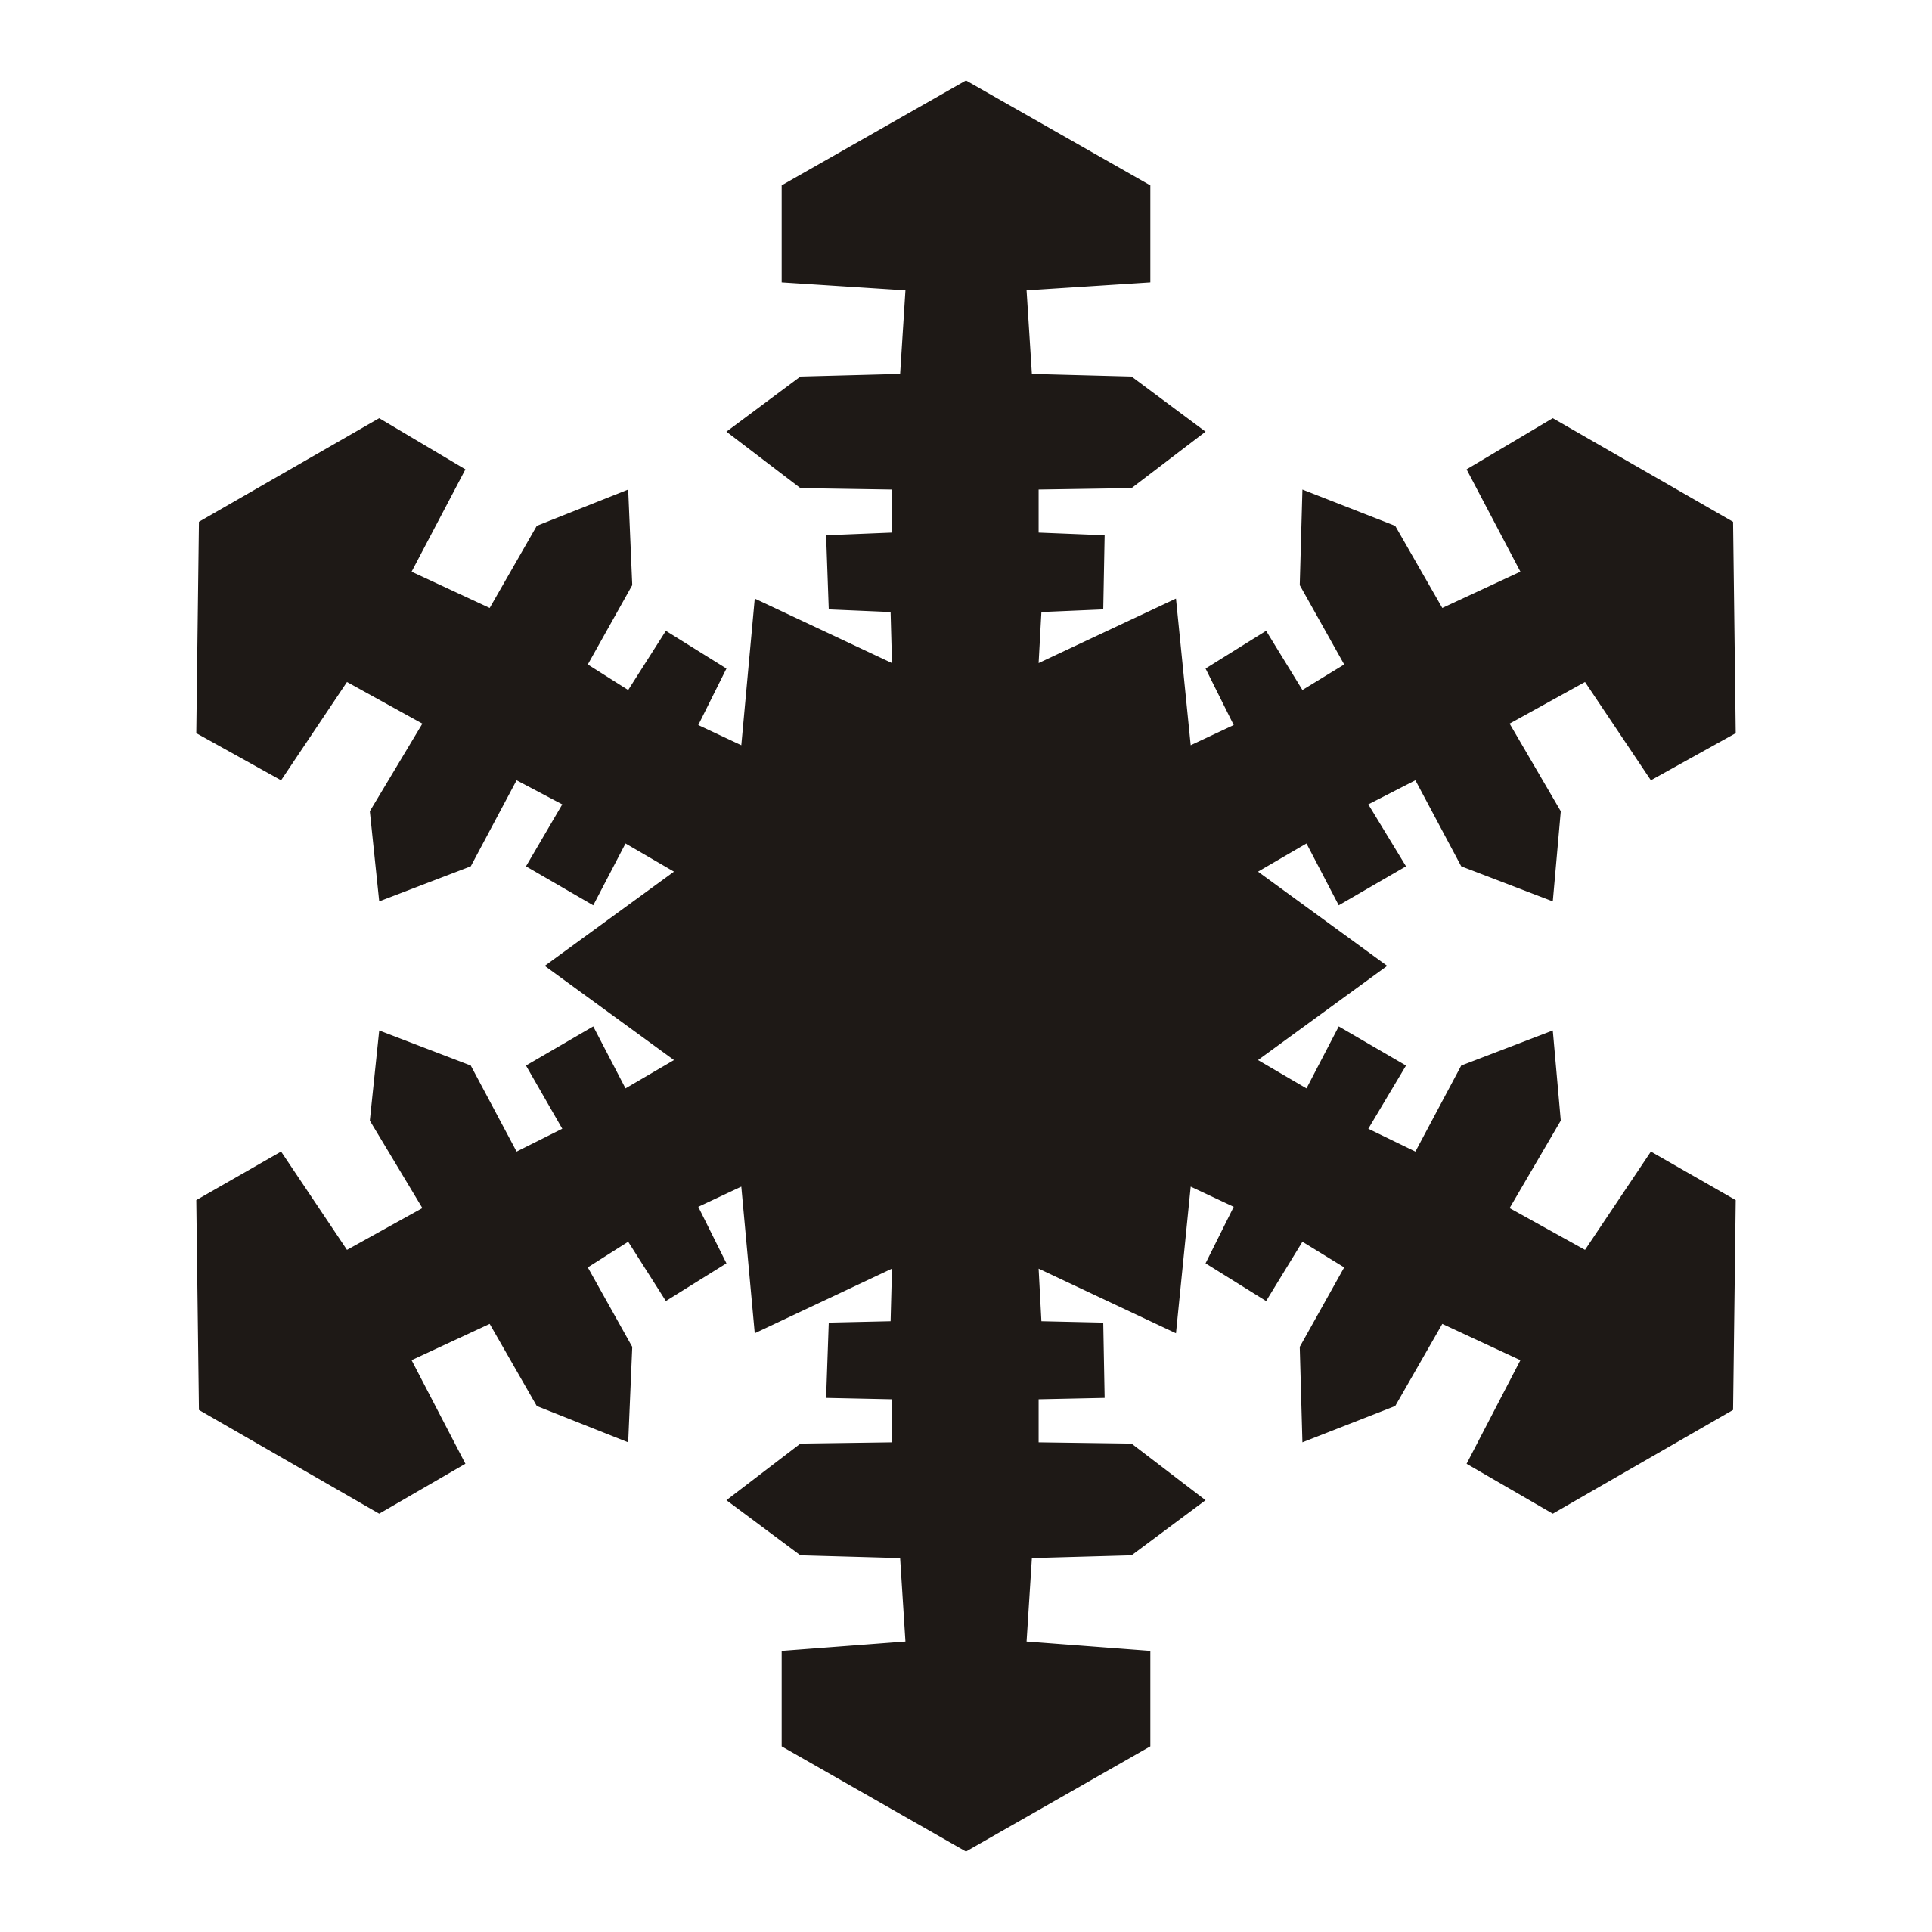 White Snowflake Clipart Png | Clipart Panda - Free Clipart Images